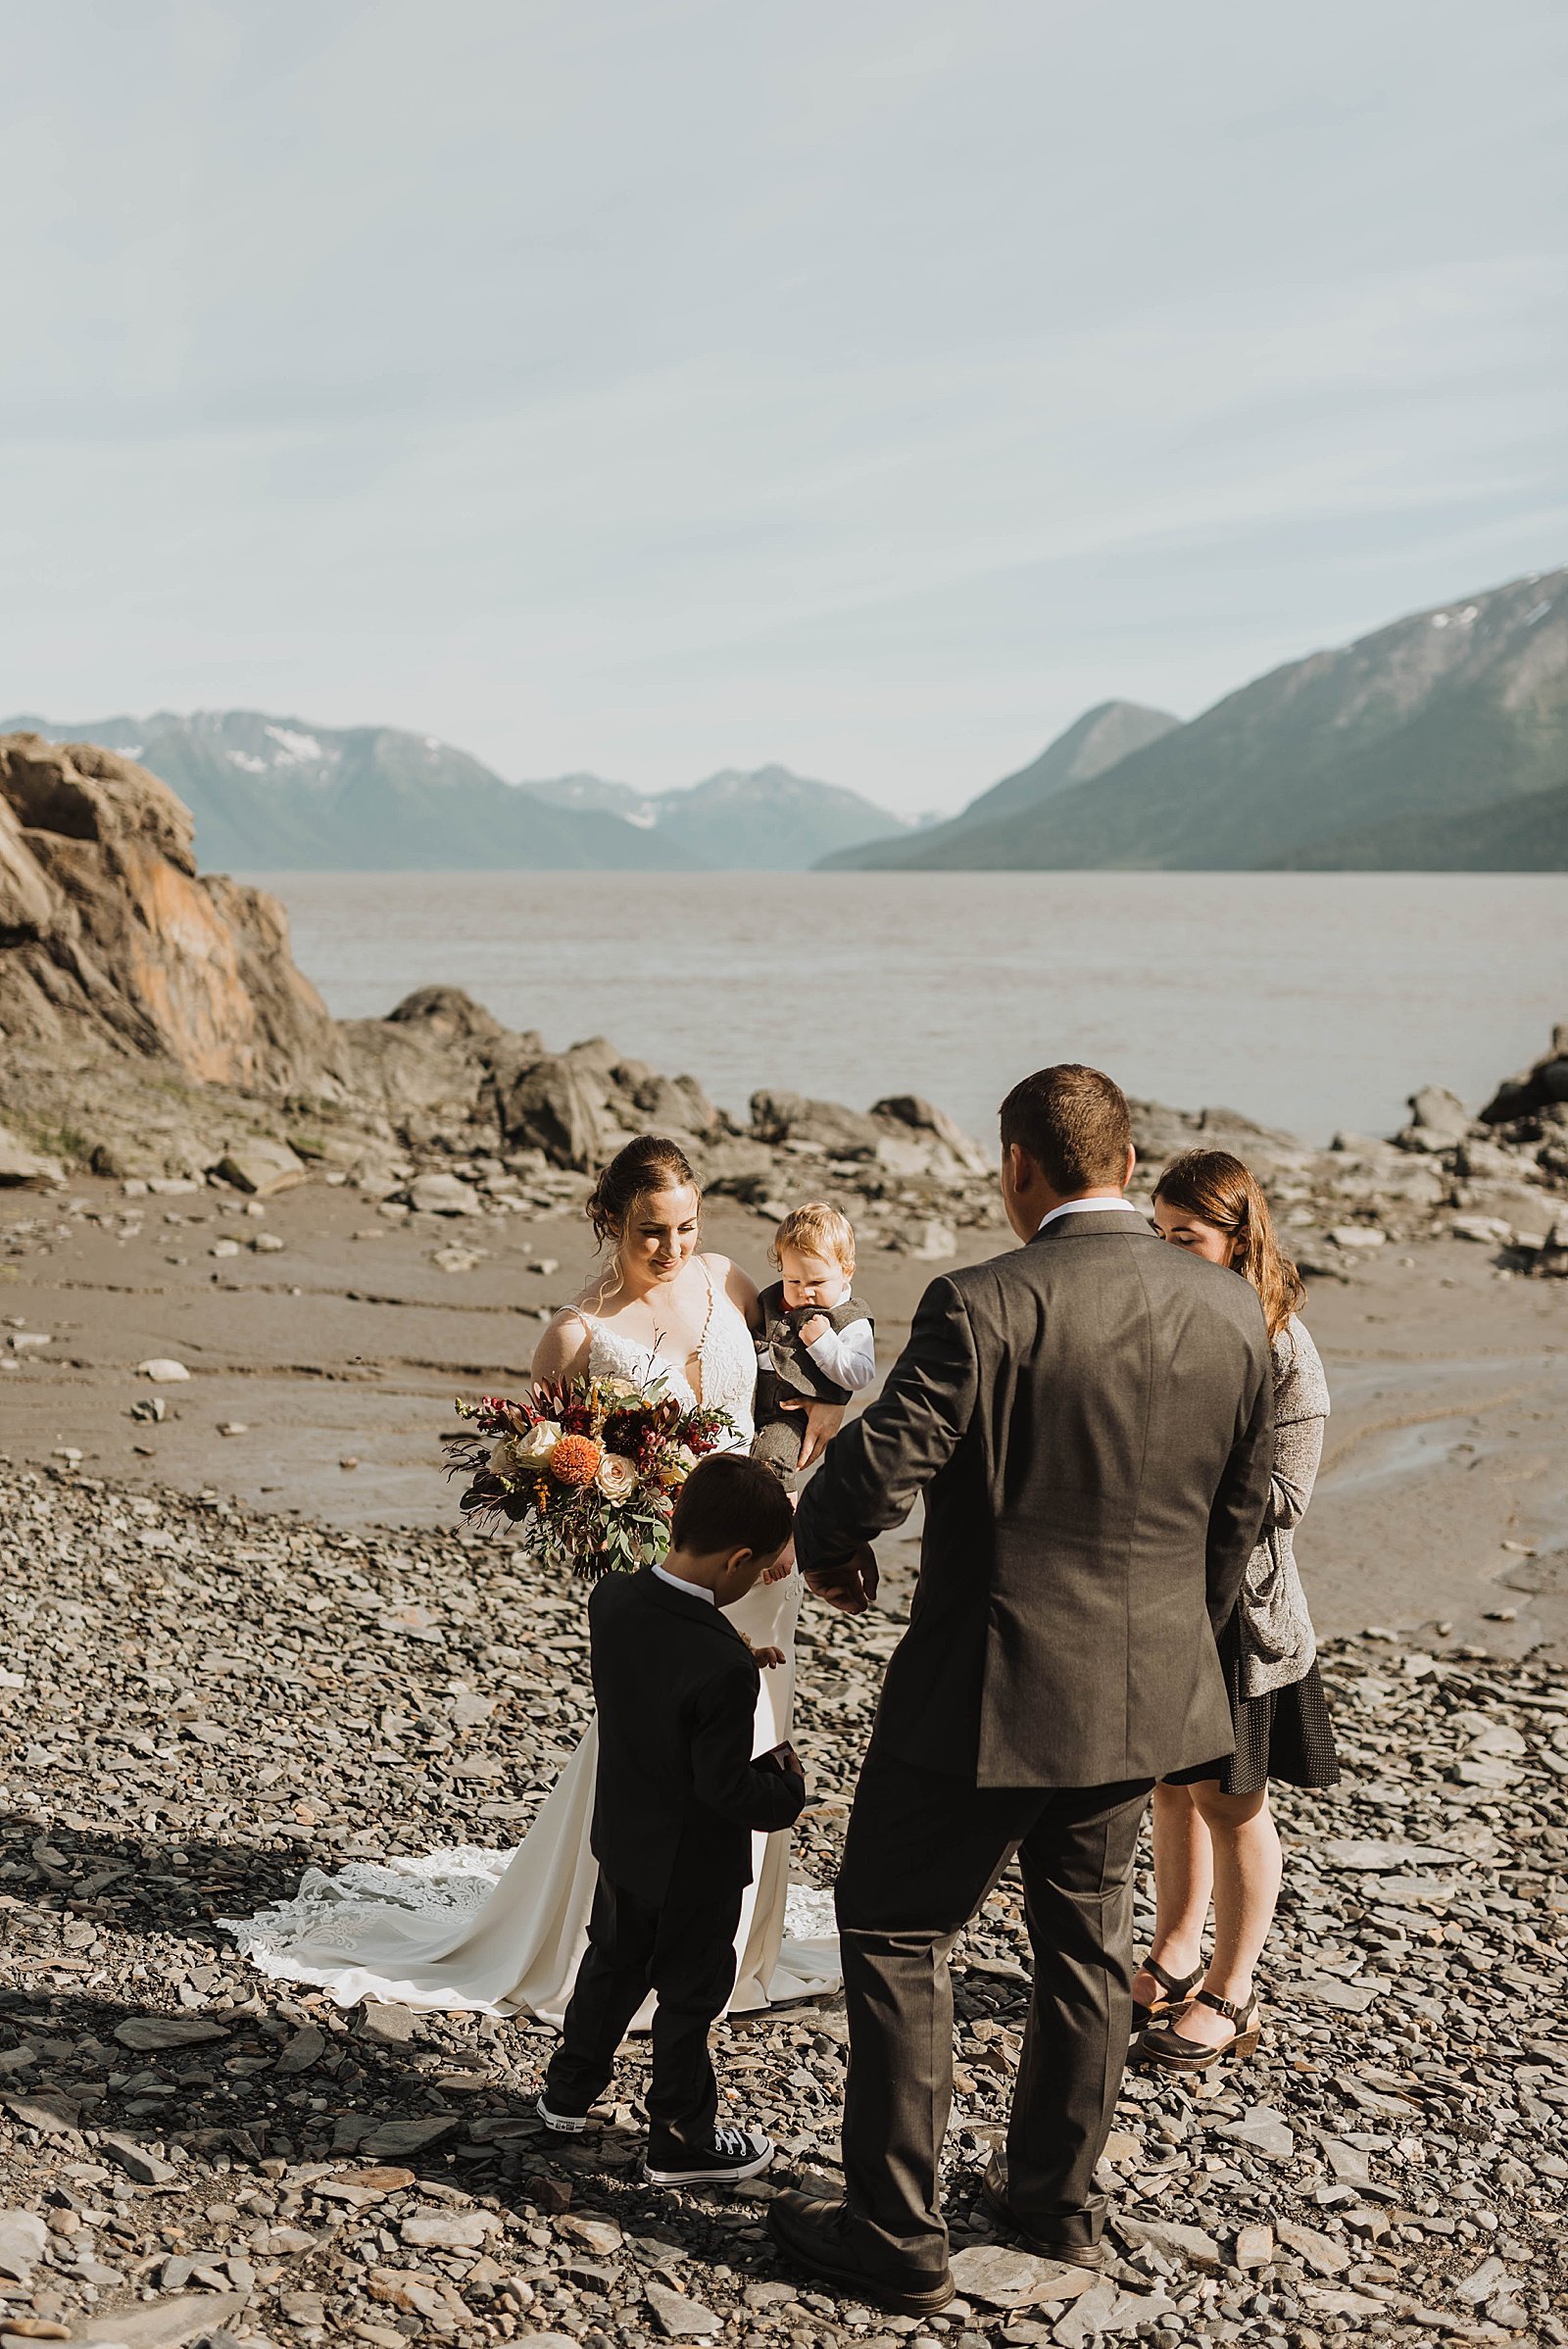  Bride and groom at a private ceremony on a beach in Alaska 